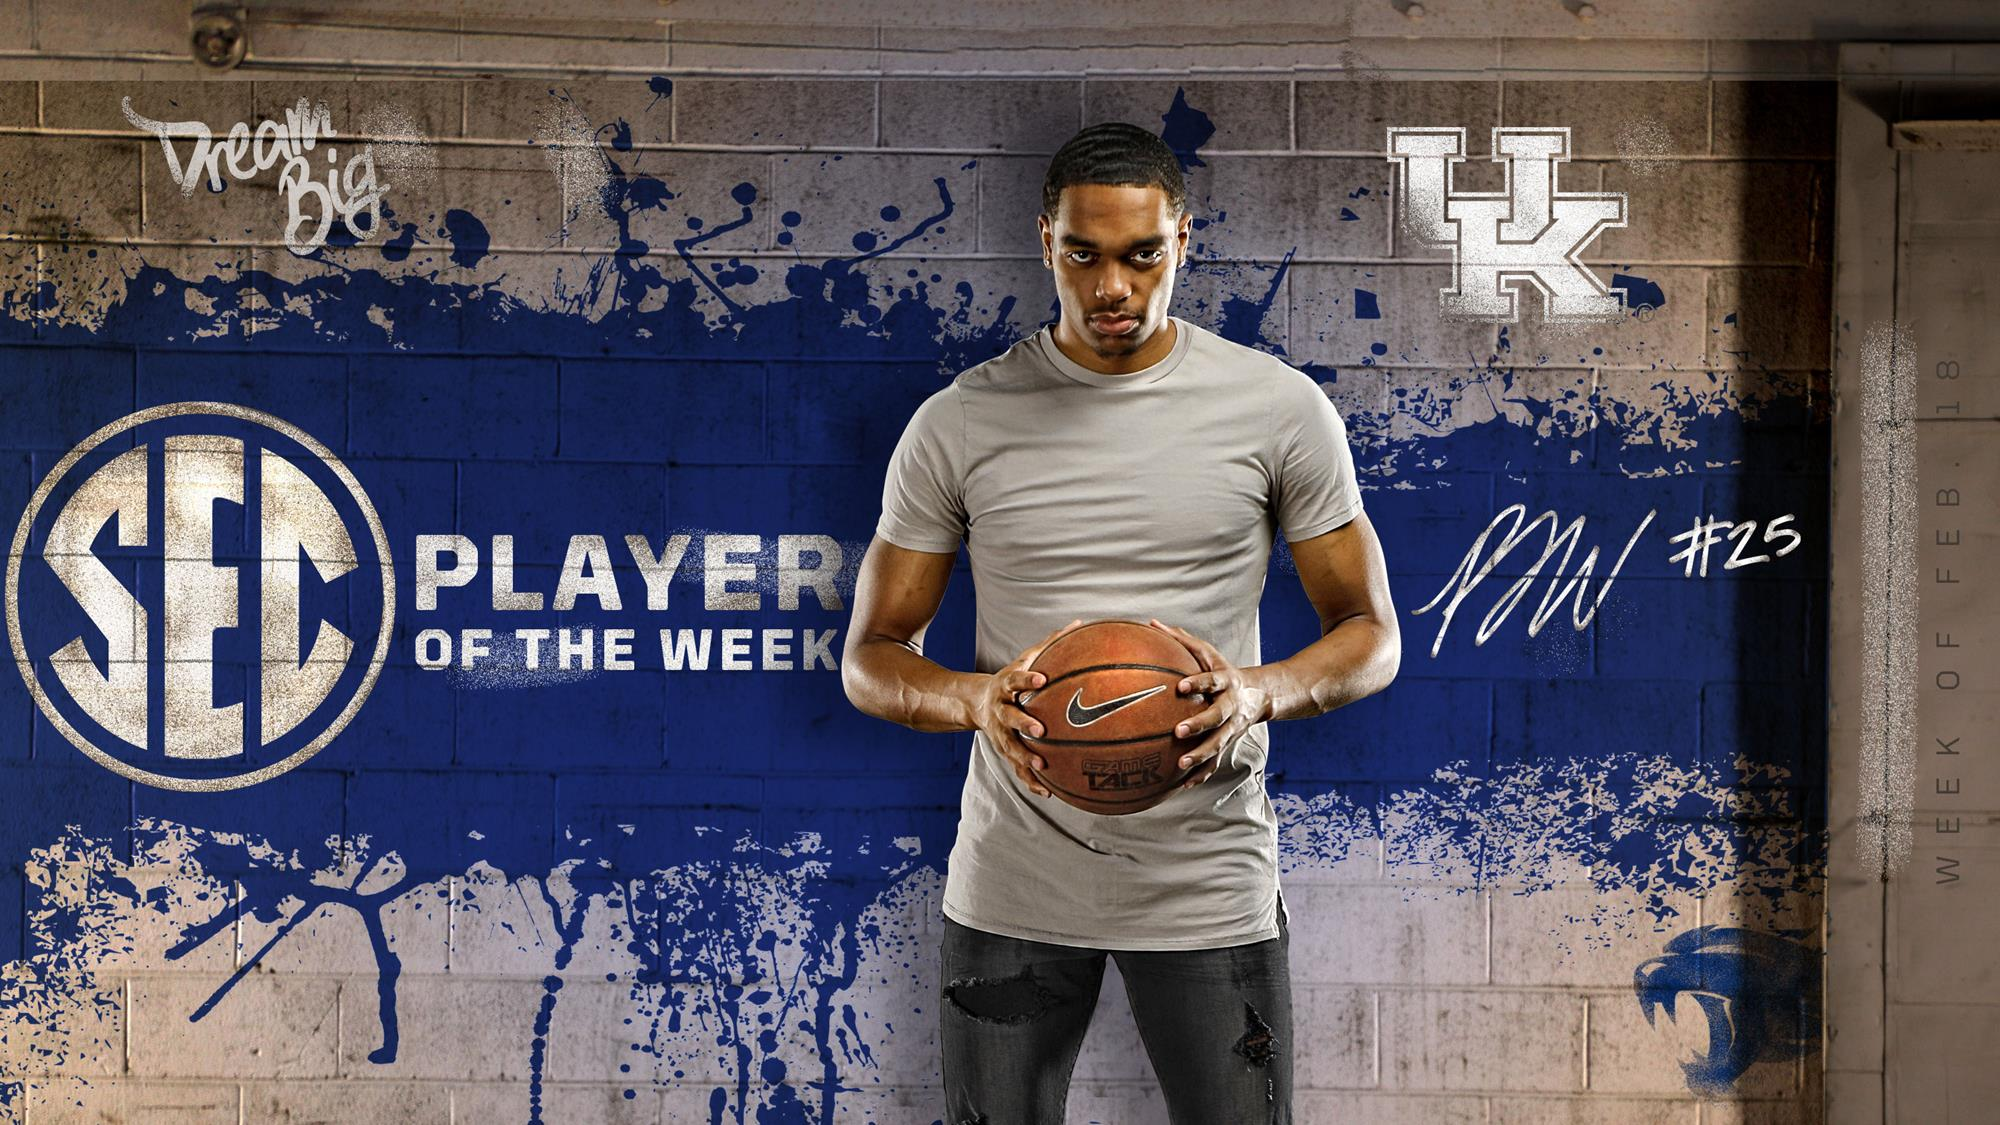 Washington Named SEC Player of the Week for Second Time